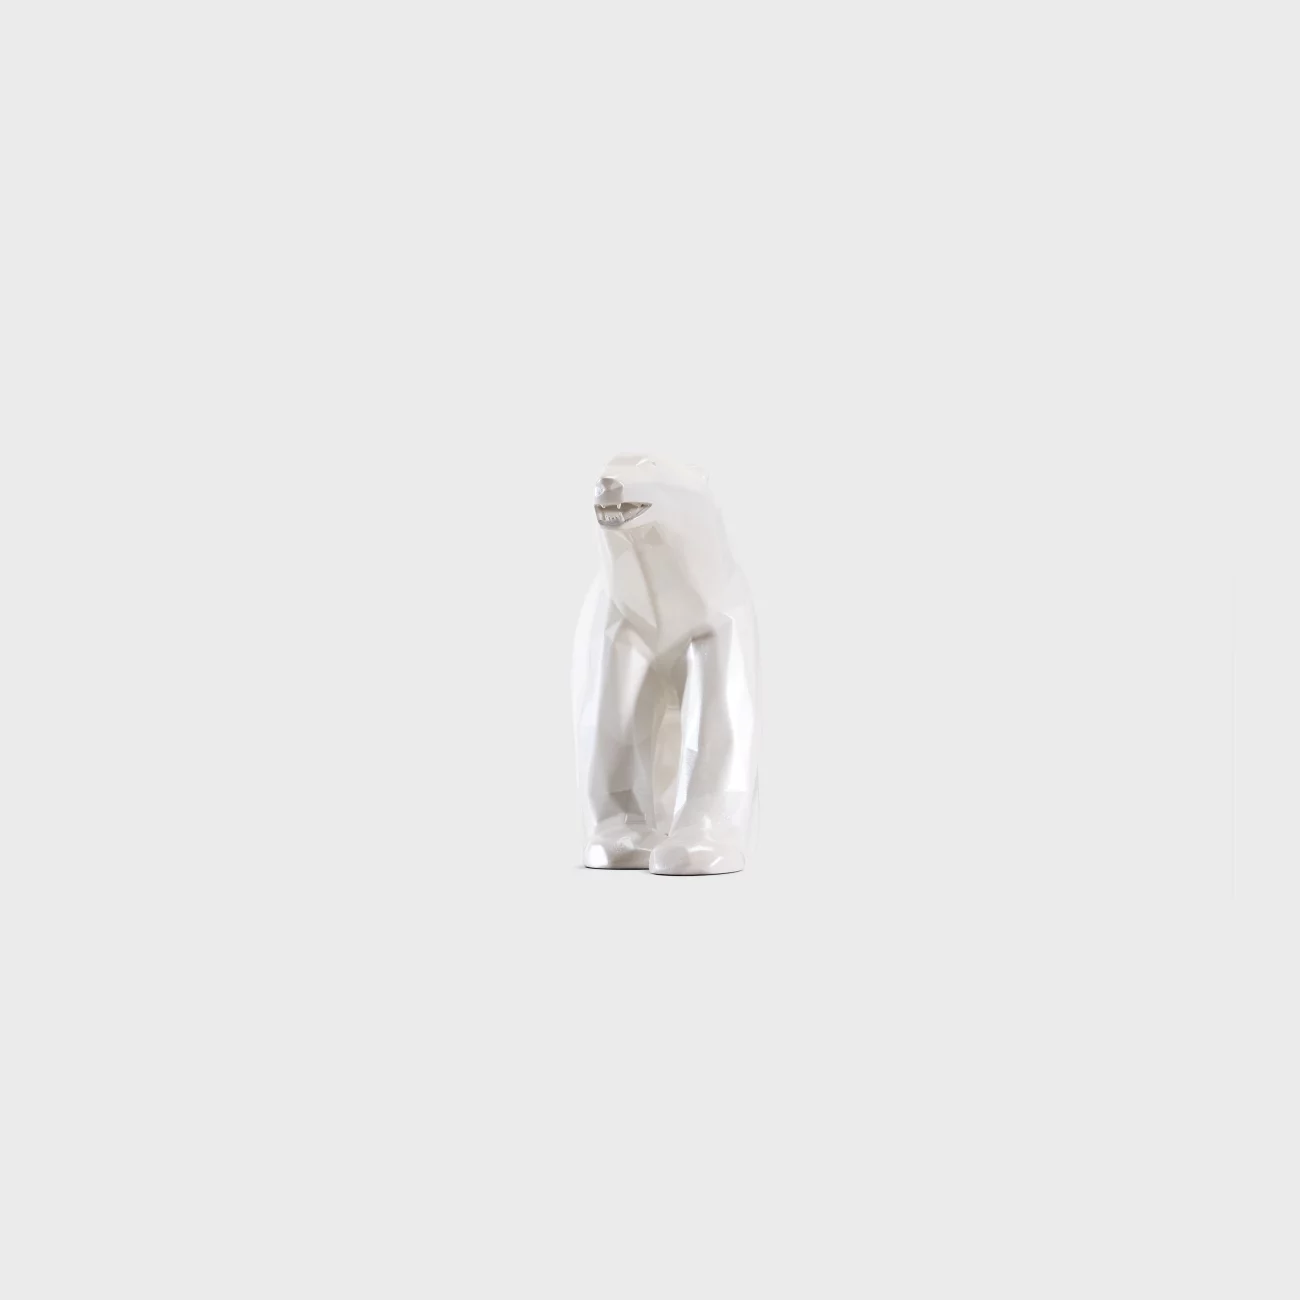 L'Ours Pompon pearly by Richard Orlinski inspired by François Pompon white polar bear - Orlinski edition museum in partnership with Artémus